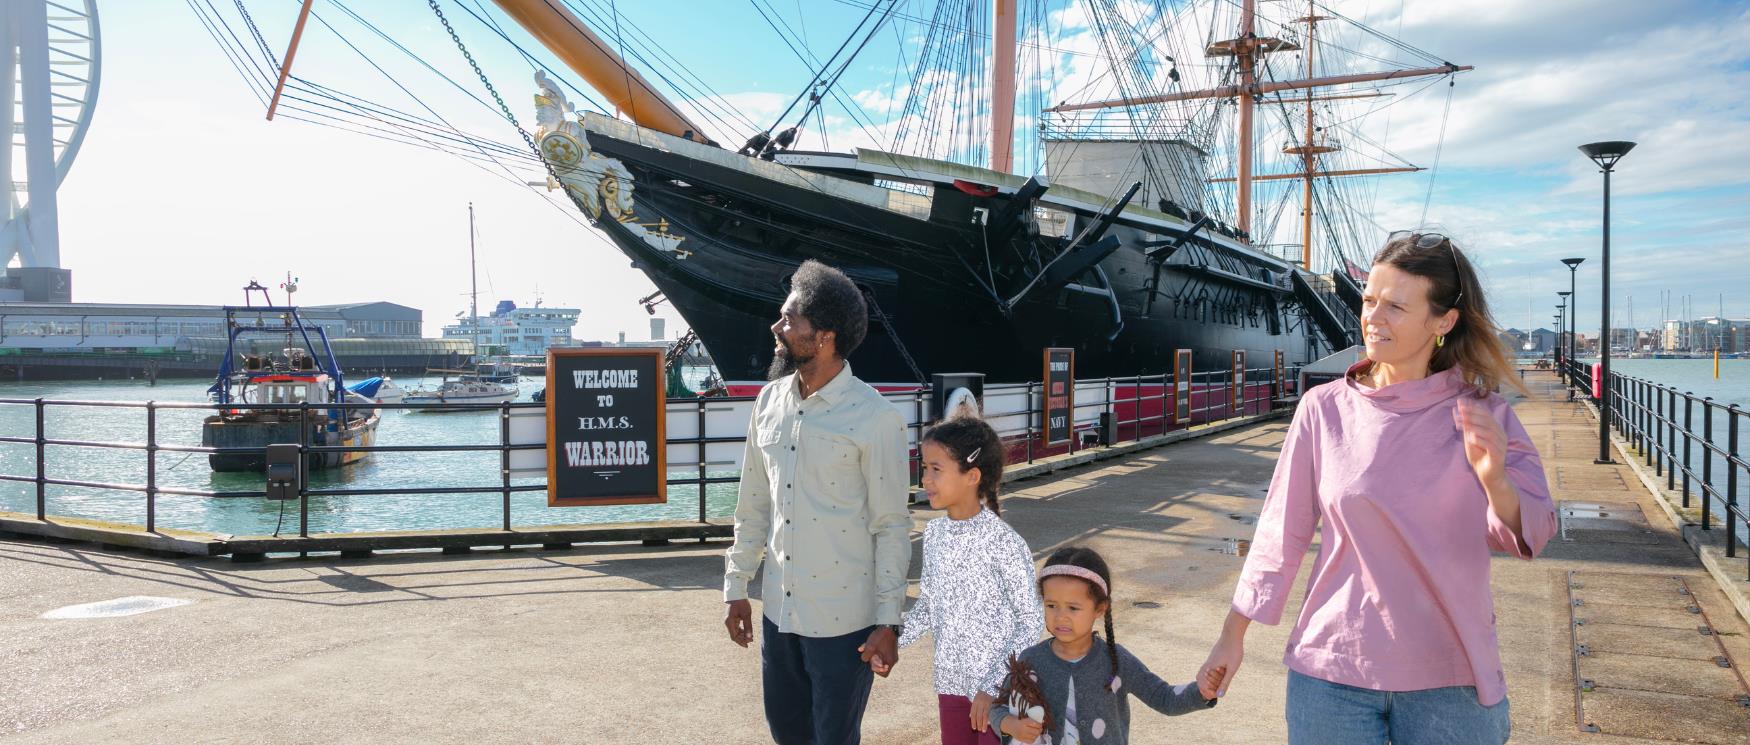 Family by HMS Warrior at Portsmouth Historic Dockyard